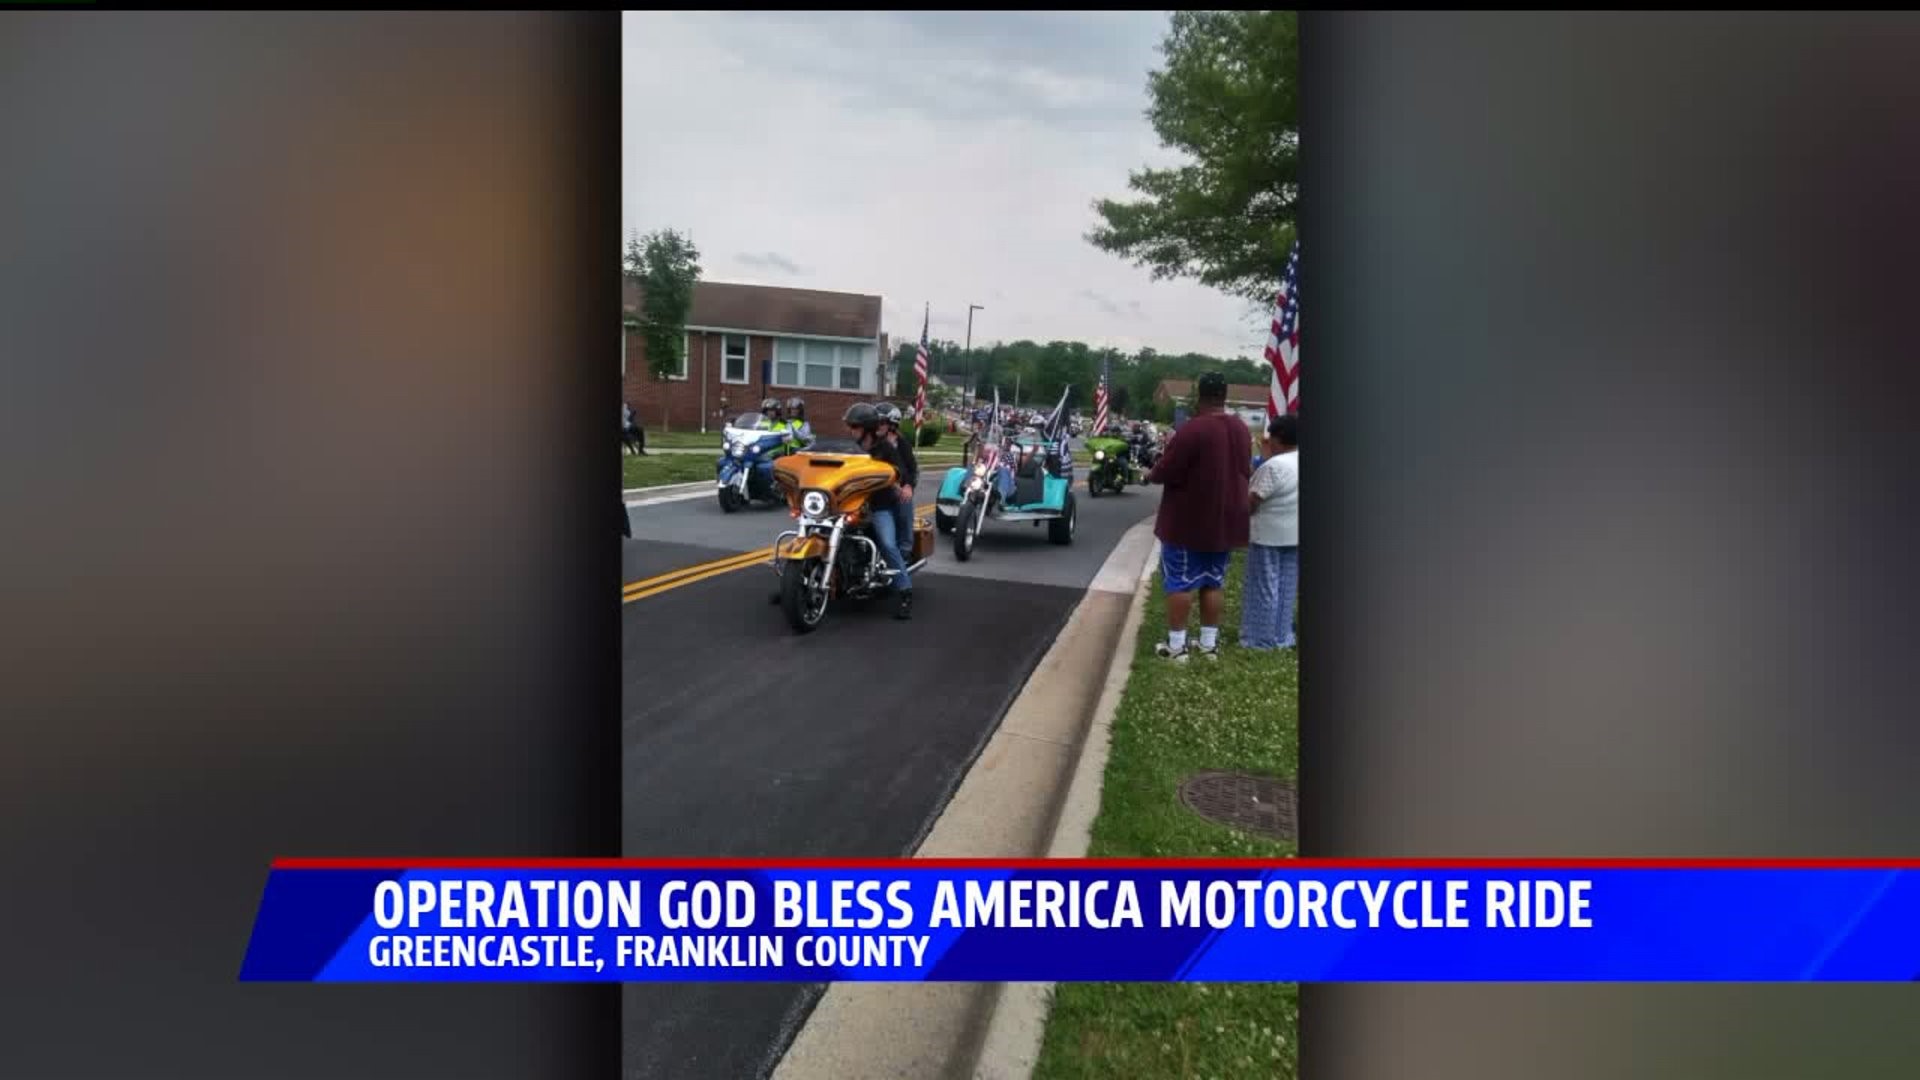 Operation God Bless America Motorcycle Ride